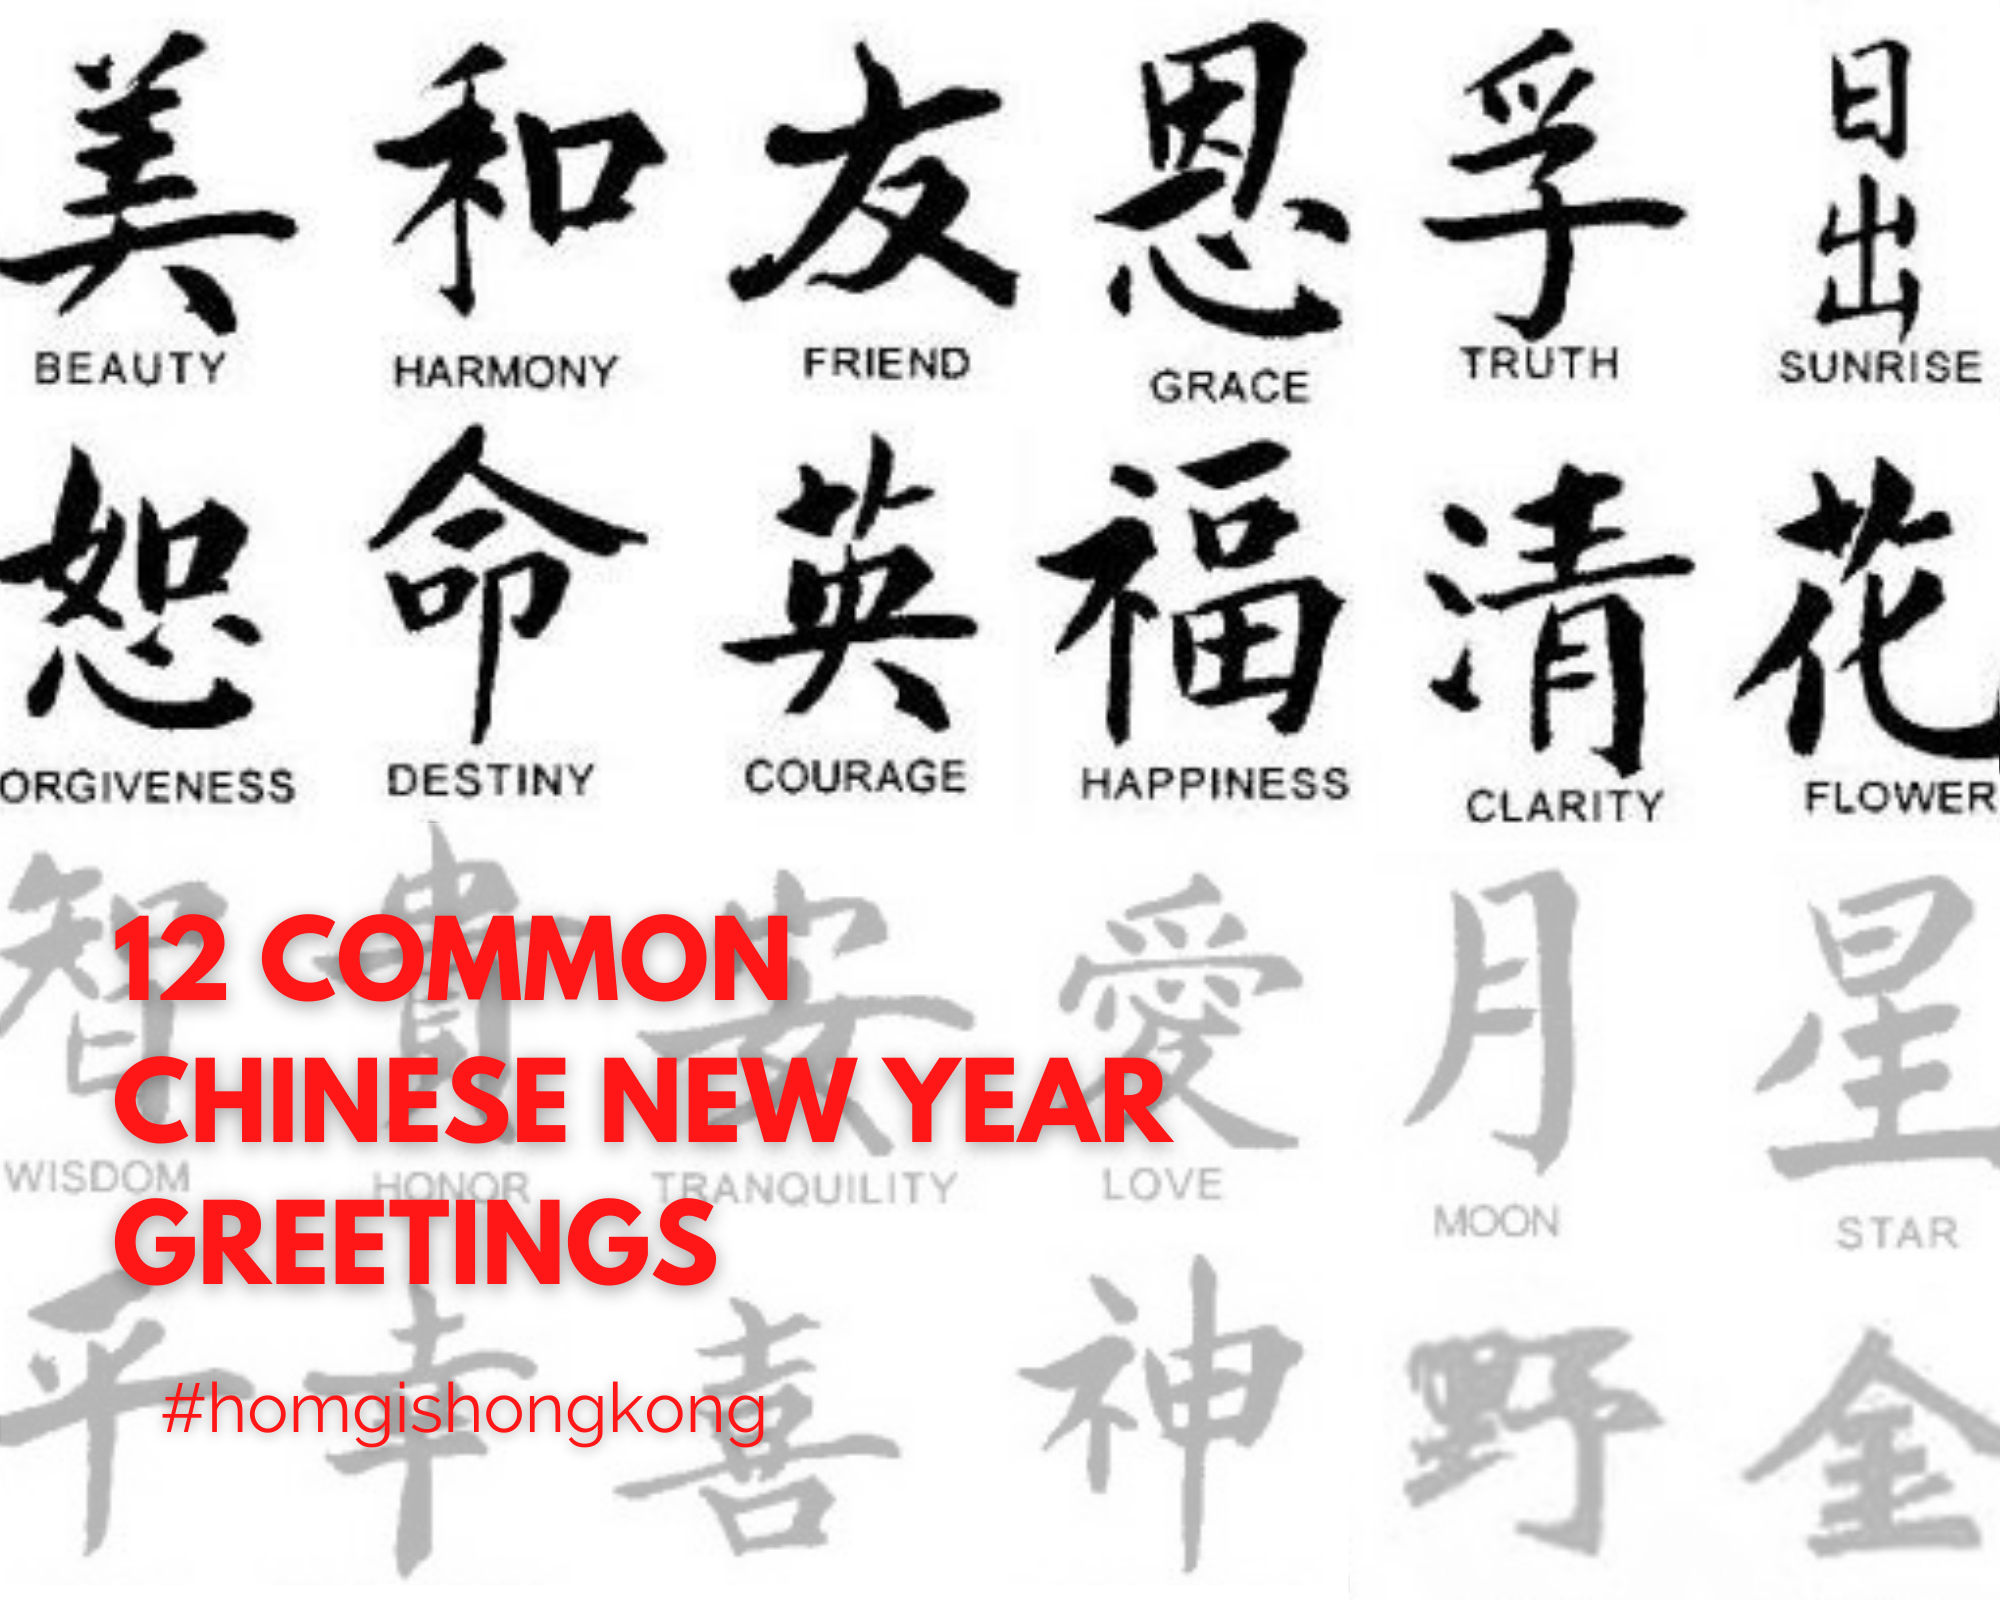 12 Common Chinese New Year Greetings